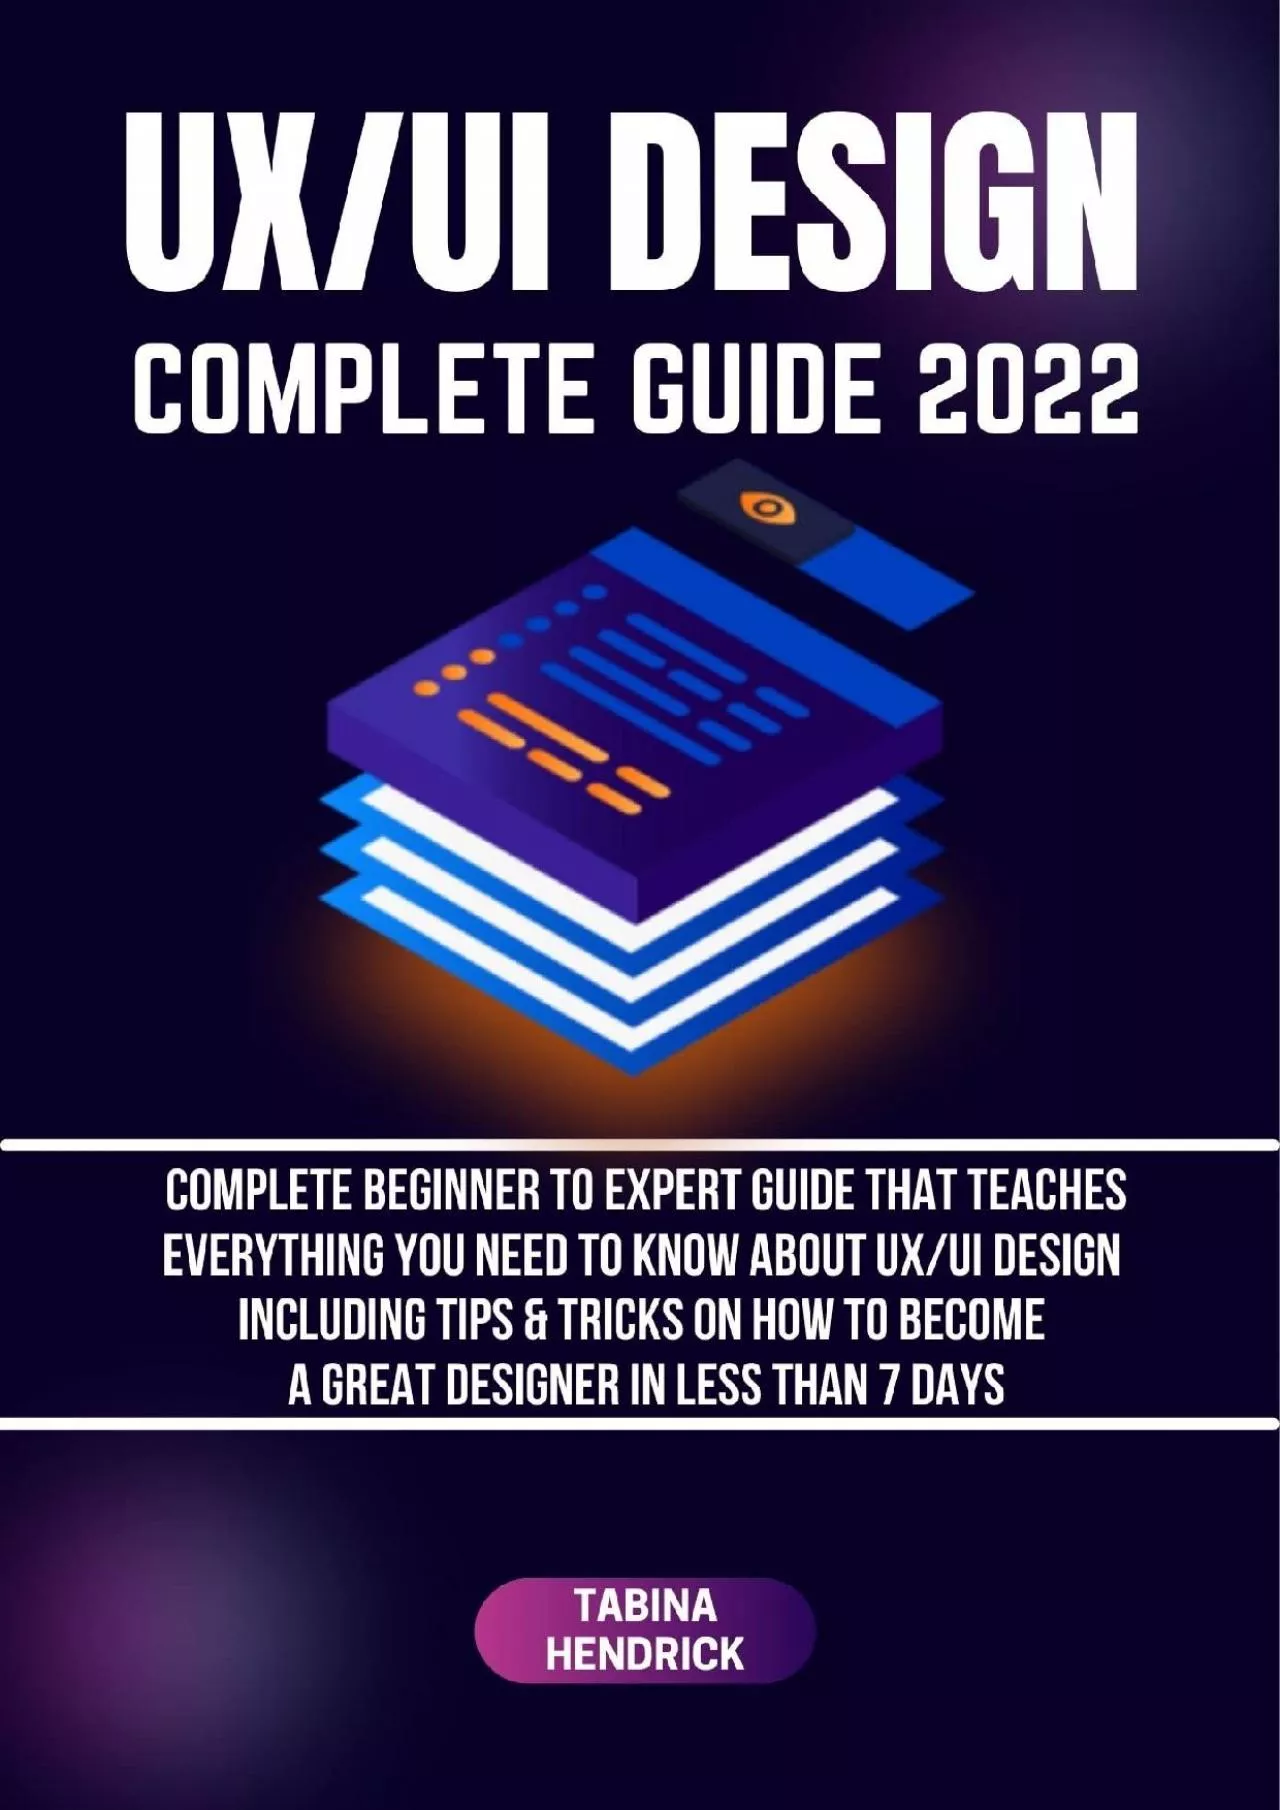 (DOWNLOAD)-UX/UI DESIGN COMPLETE GUIDE 2022 Complete Beginner to Expert Guide That Teaches